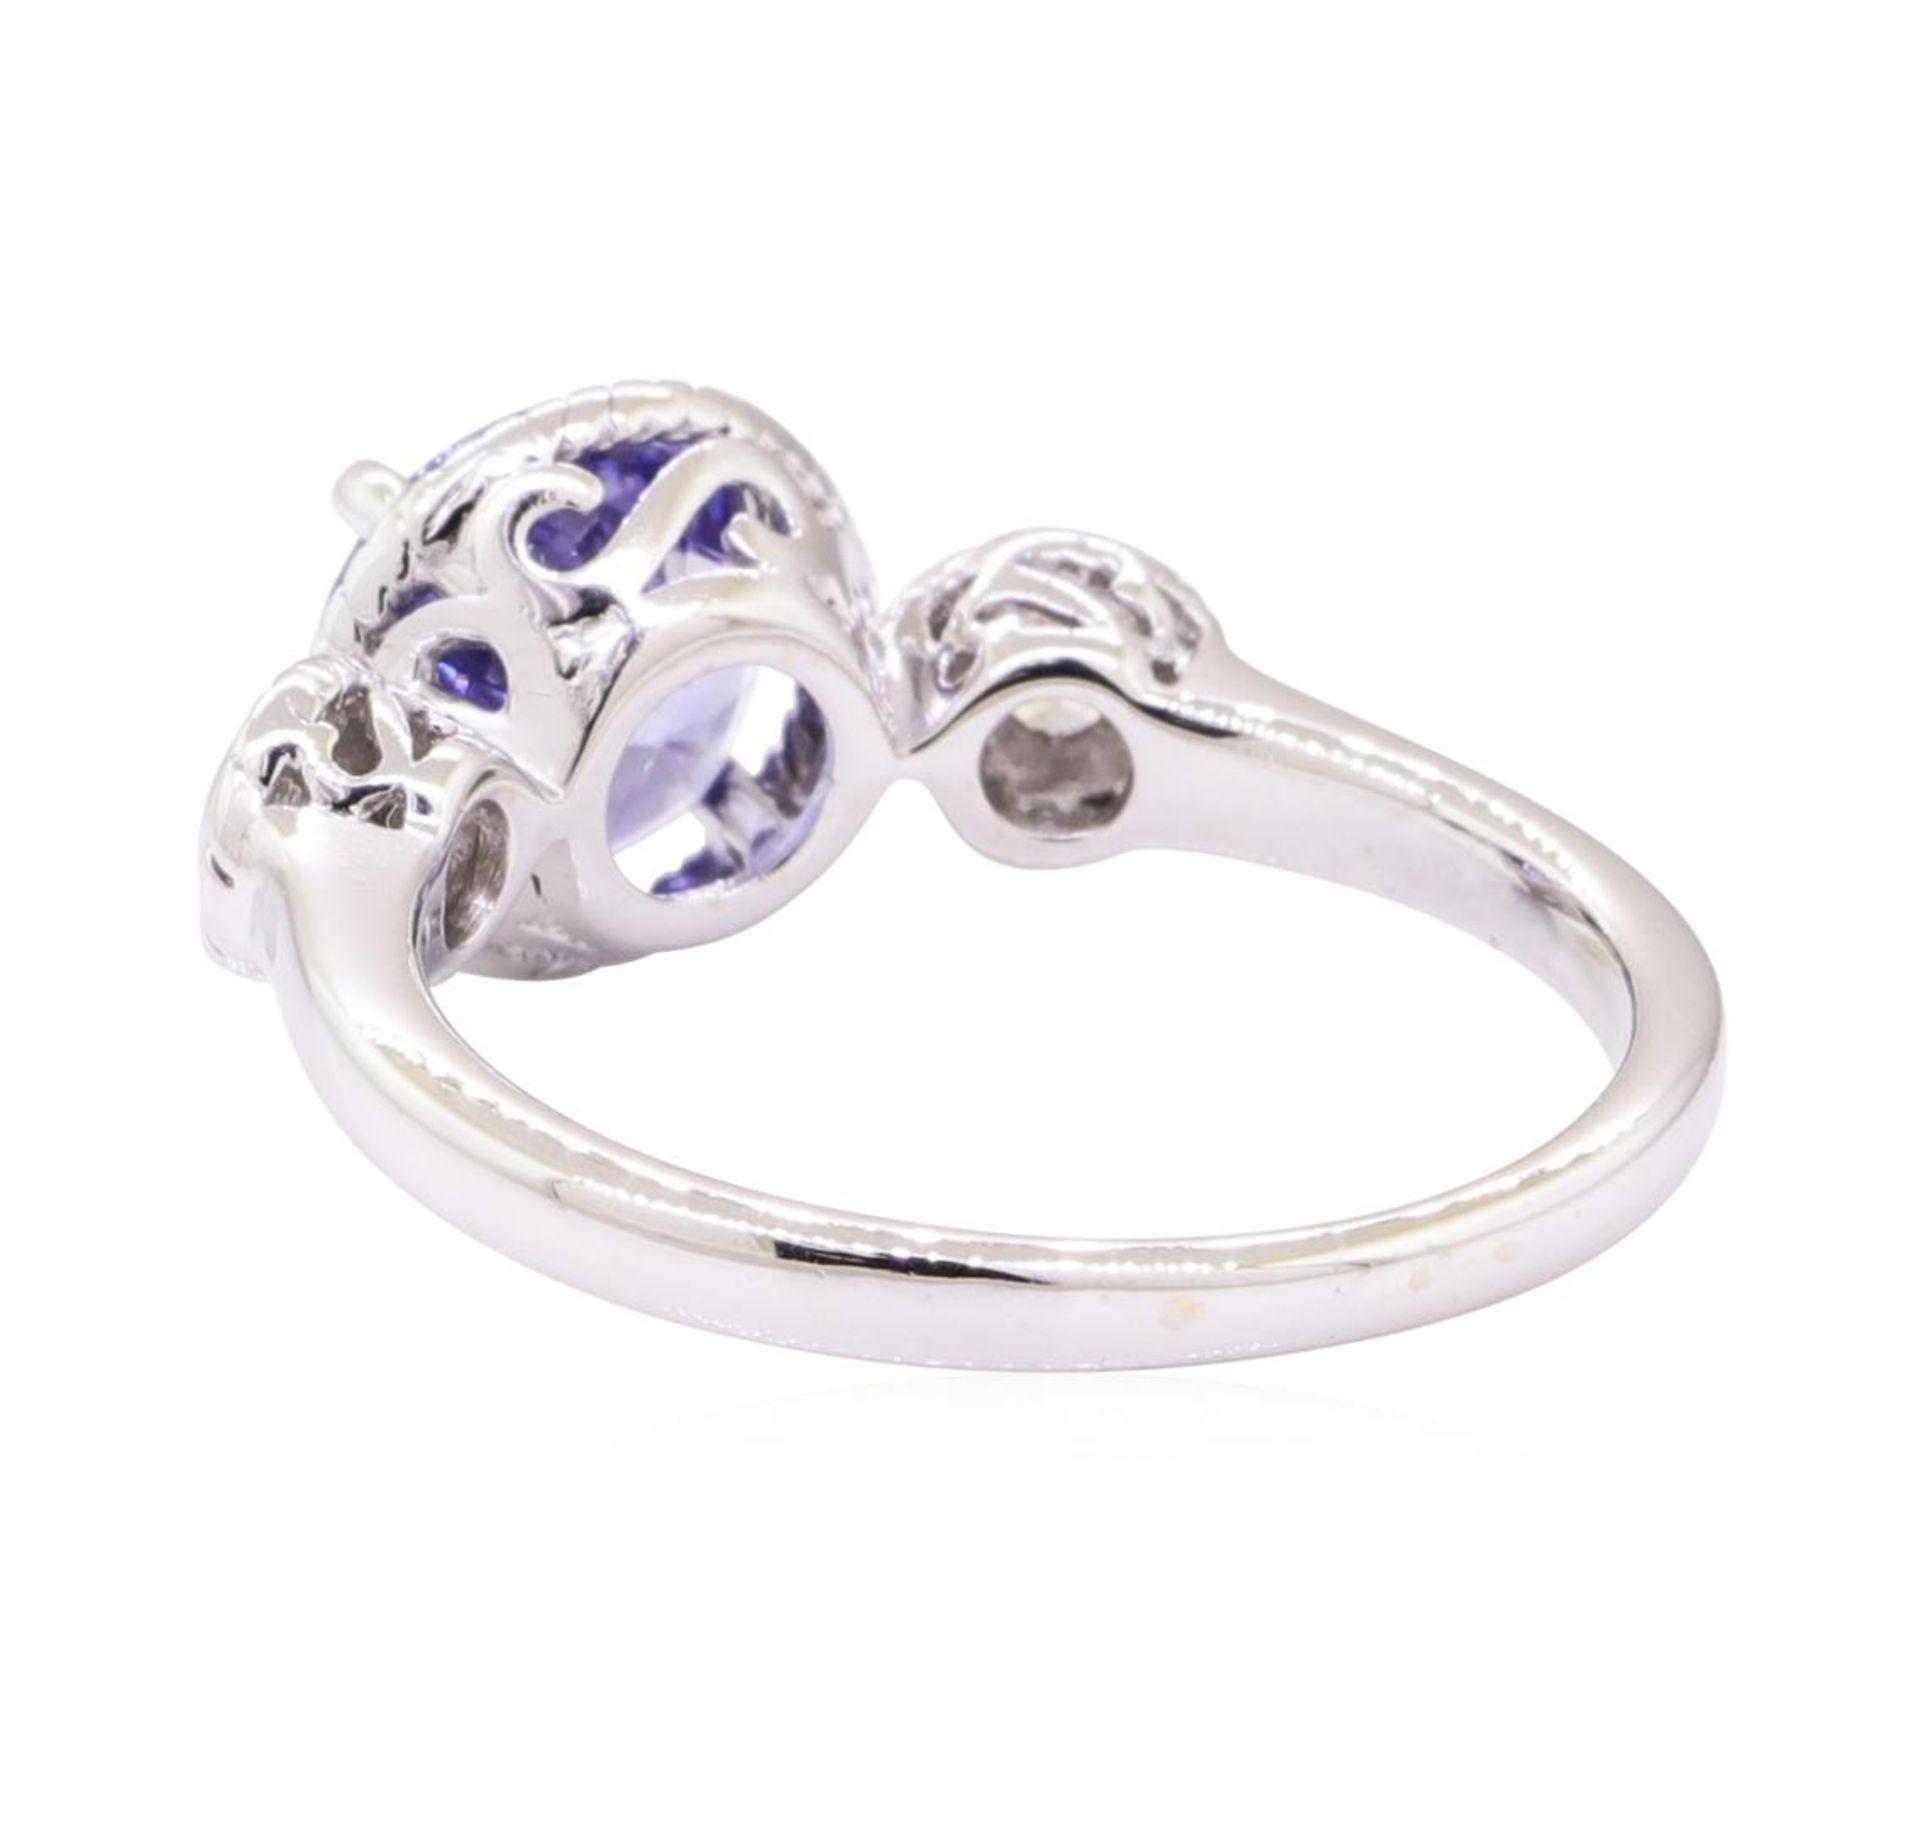 2.08ctw Blue Sapphire and Diamond Ring - 14KT White Gold - Image 3 of 4